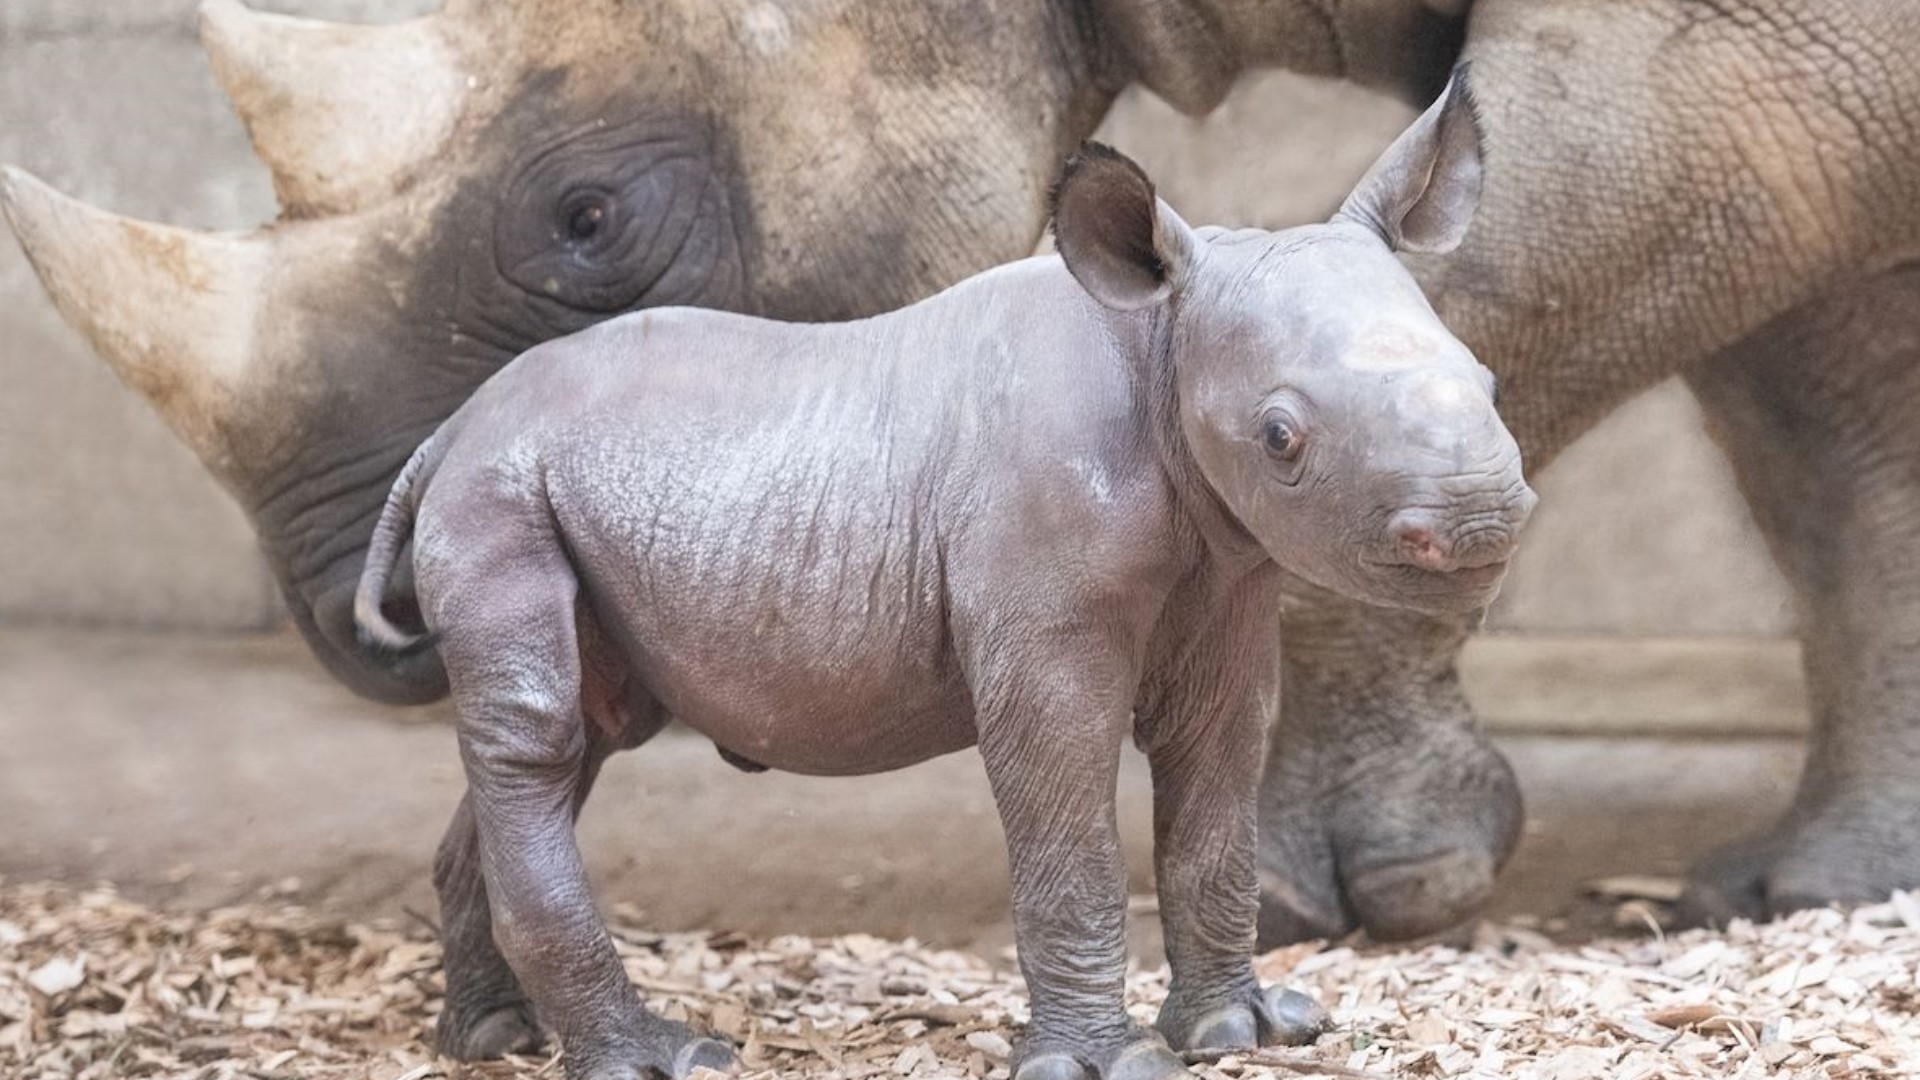 The birth of the Eastern black rhino calf took place on July 9. You can help name her from now until August 5.